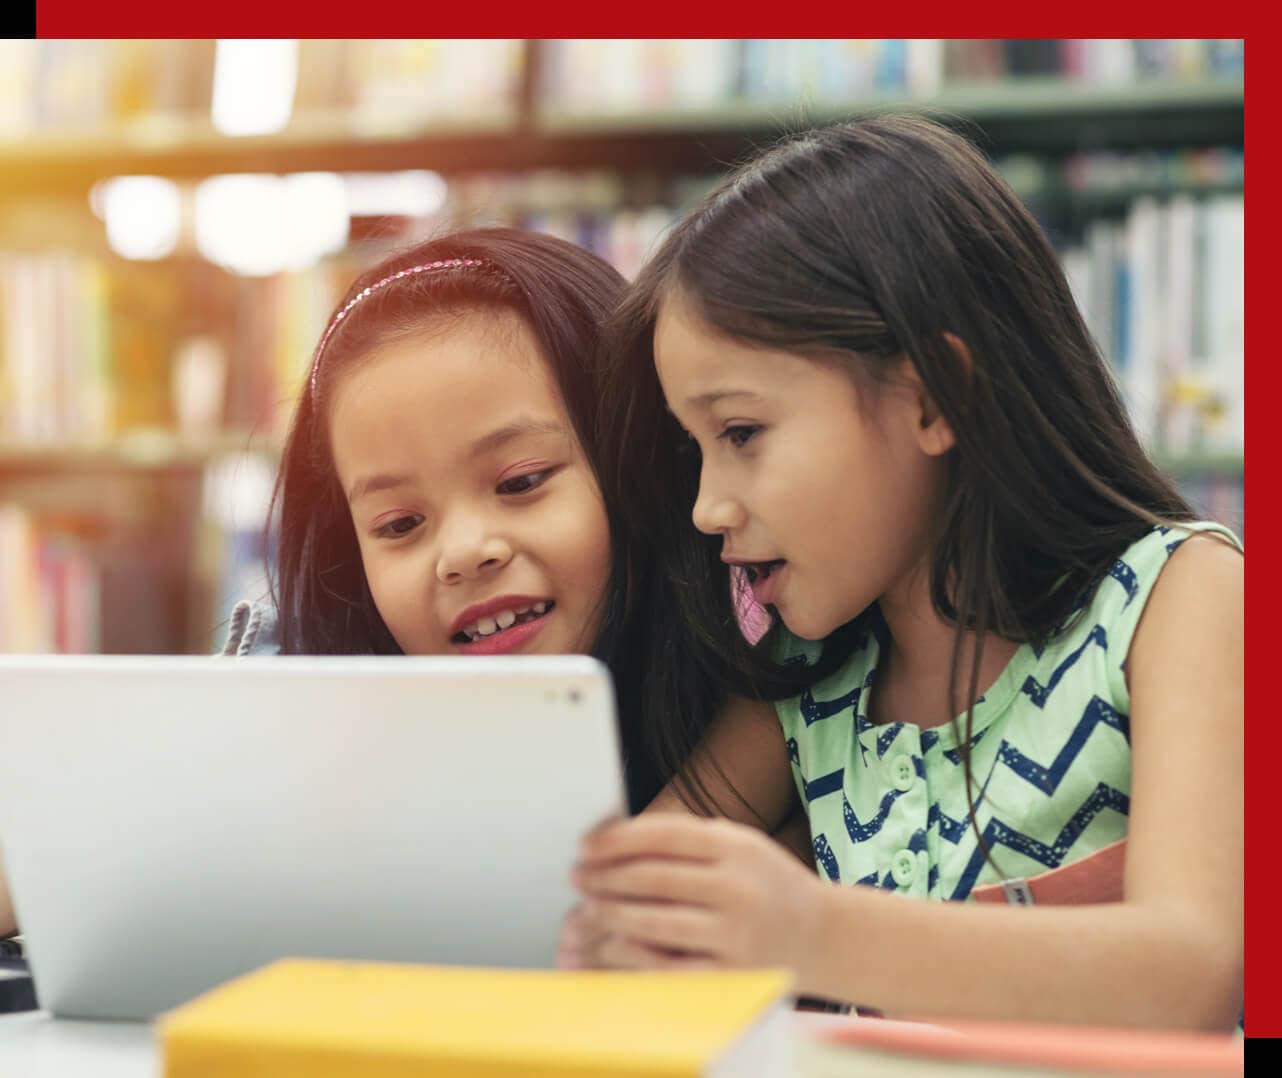 Two young girls at a table in a library, looking at the display of a Lenovo laptop or Chromebook